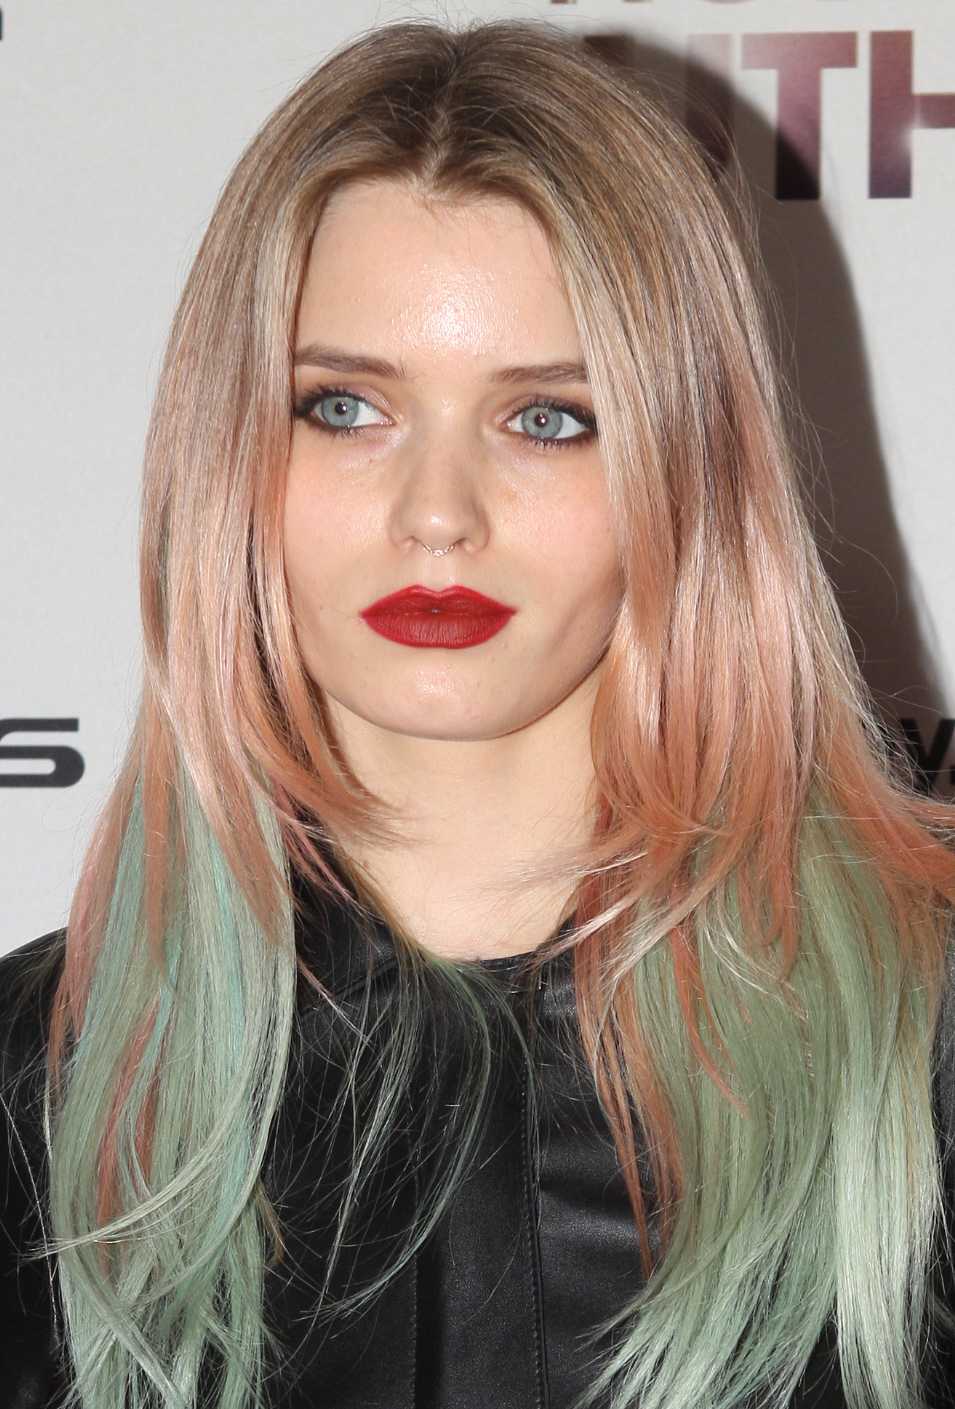 55 Hot Pictures Of Abbey Lee Kershaw Are Just Too Yum For Her Fans | Best Of Comic Books